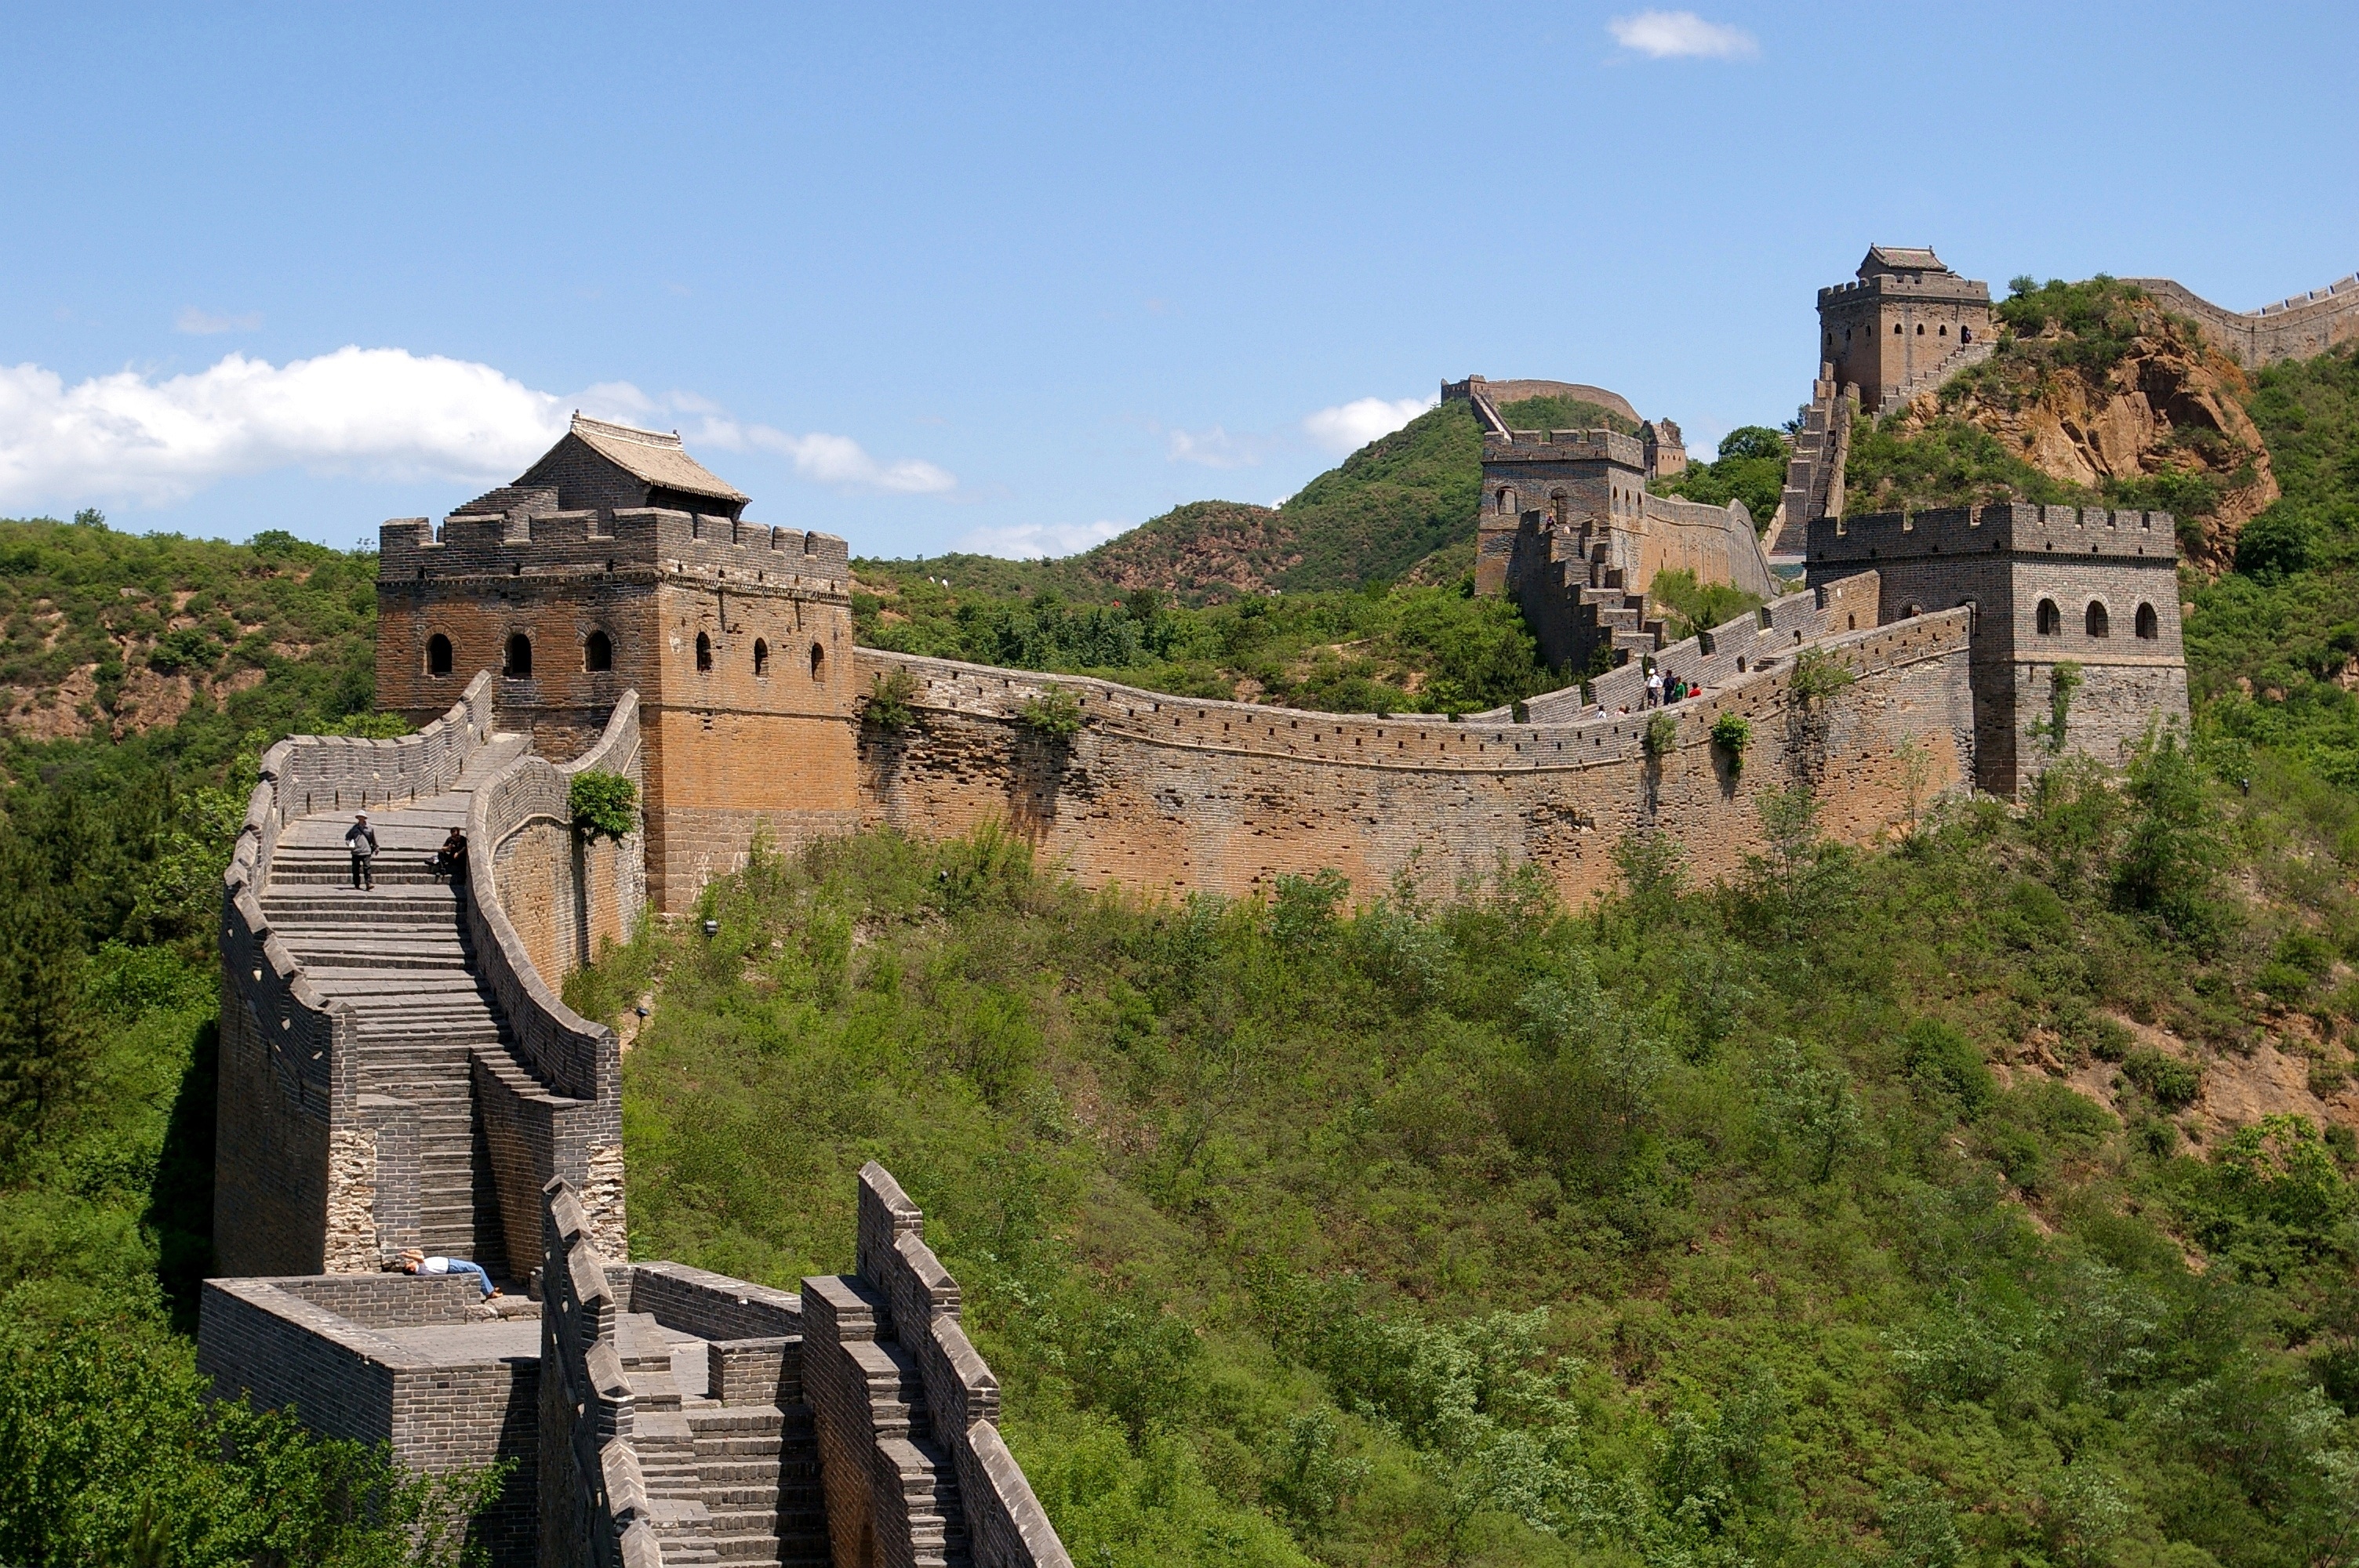 Amazing The Great Wall Pictures & Backgrounds